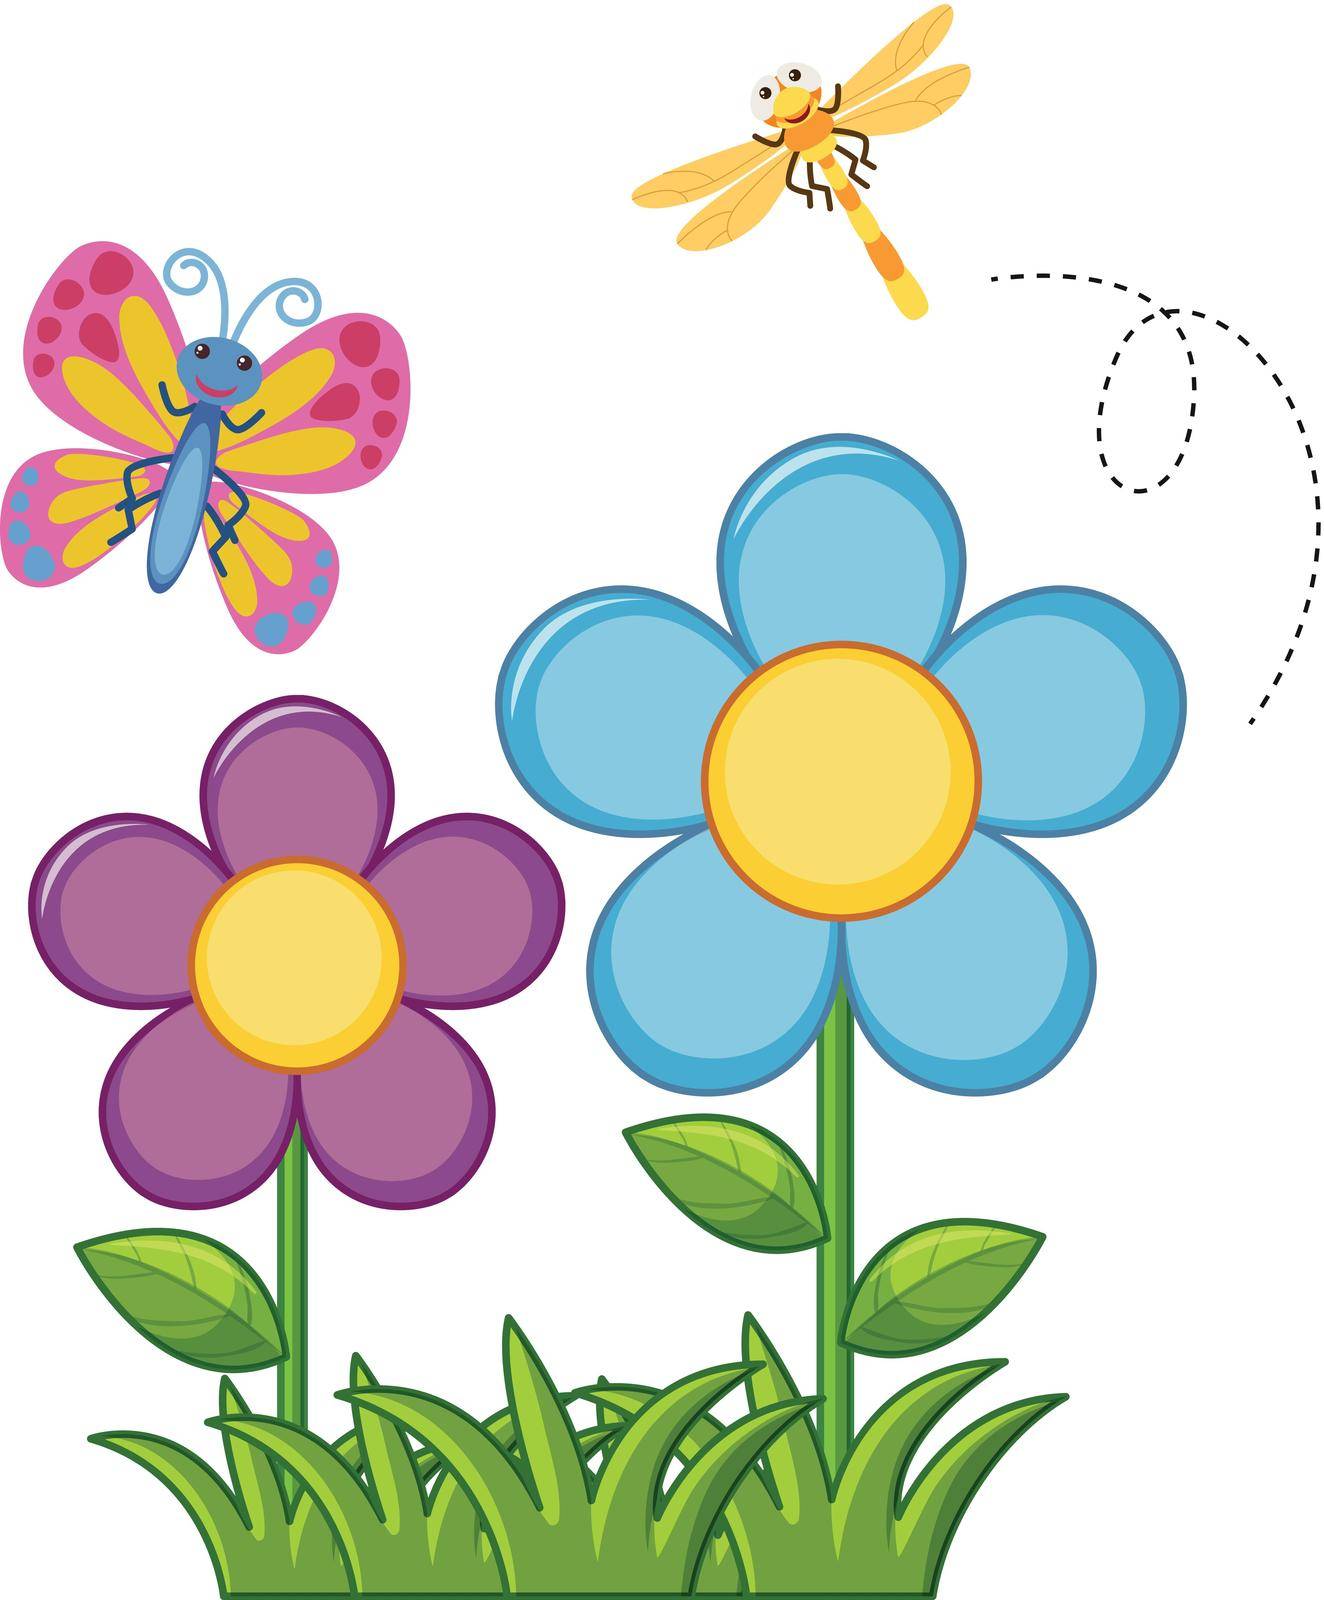 Butterfly and dragonfly in flower garden illustration